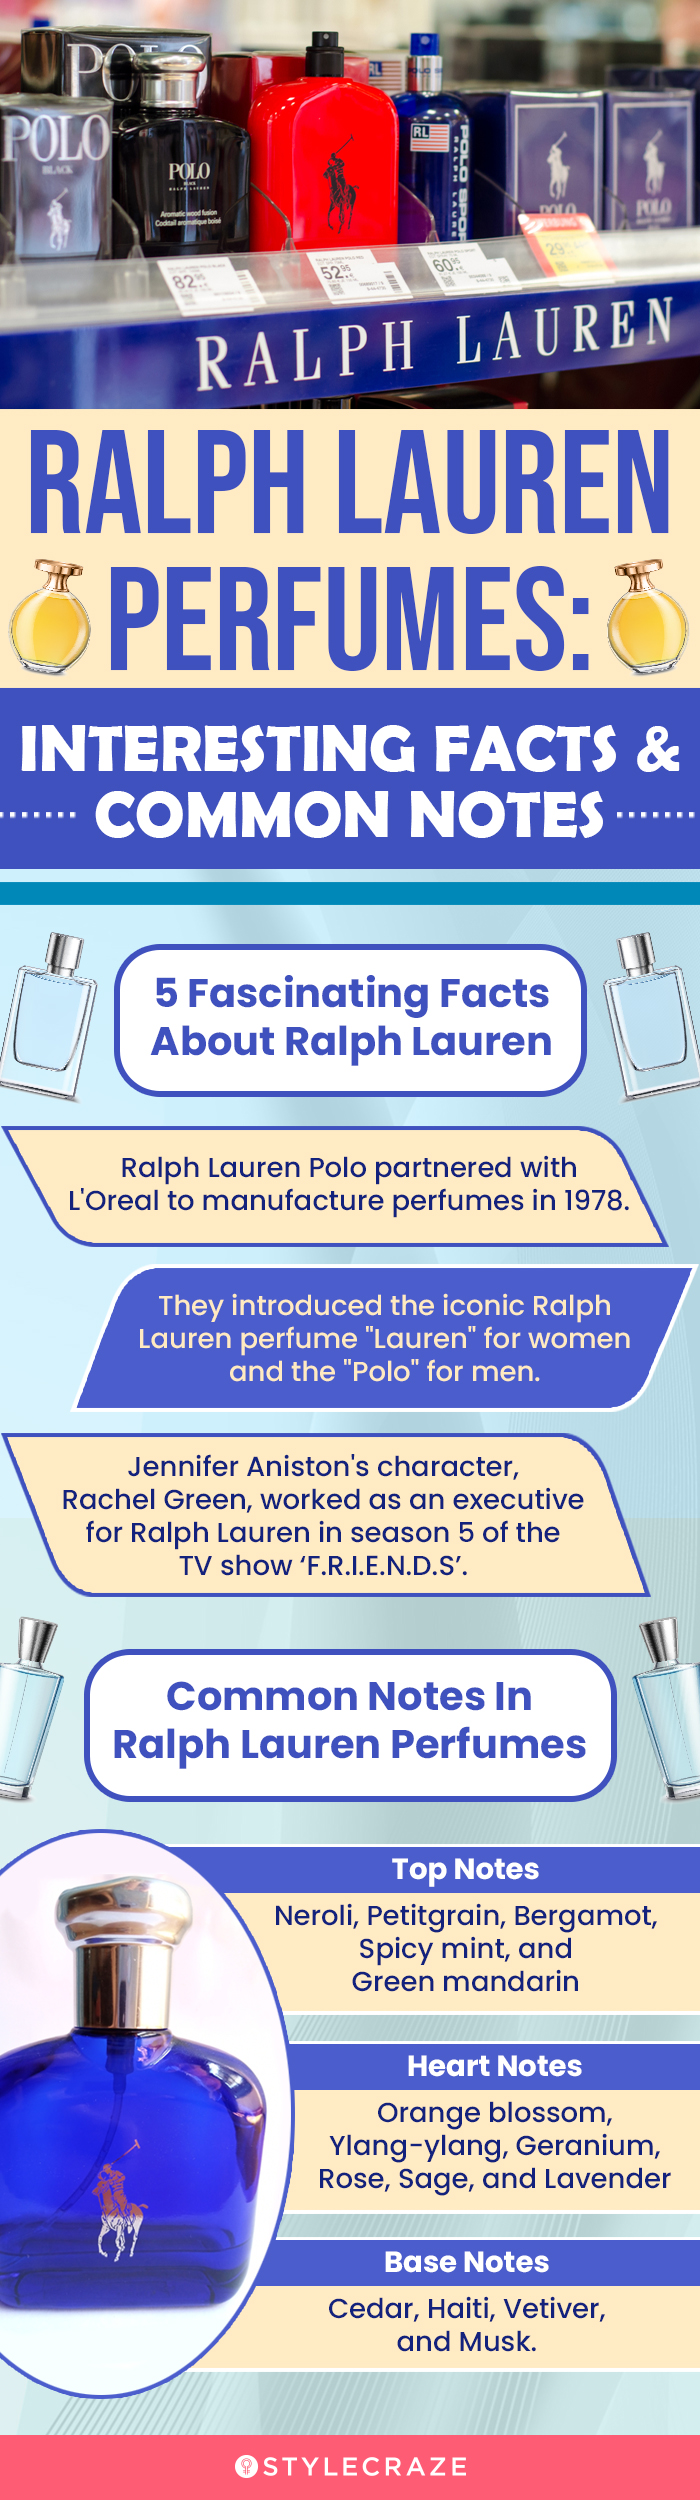 Ralph Lauren Perfumes: Interesting Facts & Common Notes (infographic)